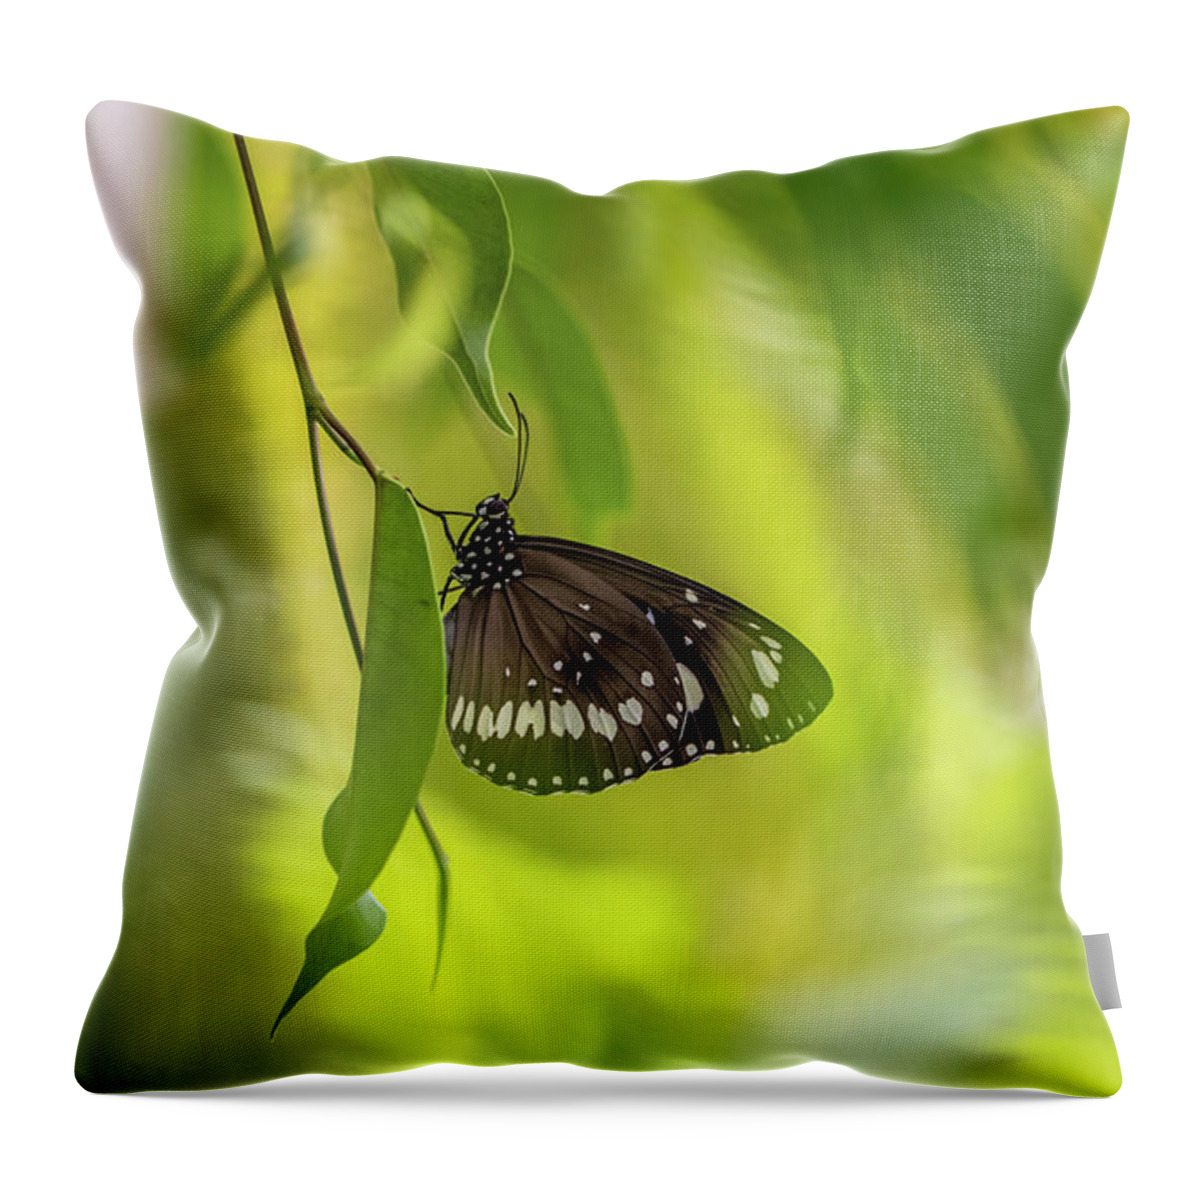 Green Leaves Throw Pillow featuring the photograph Enchanted by Az Jackson